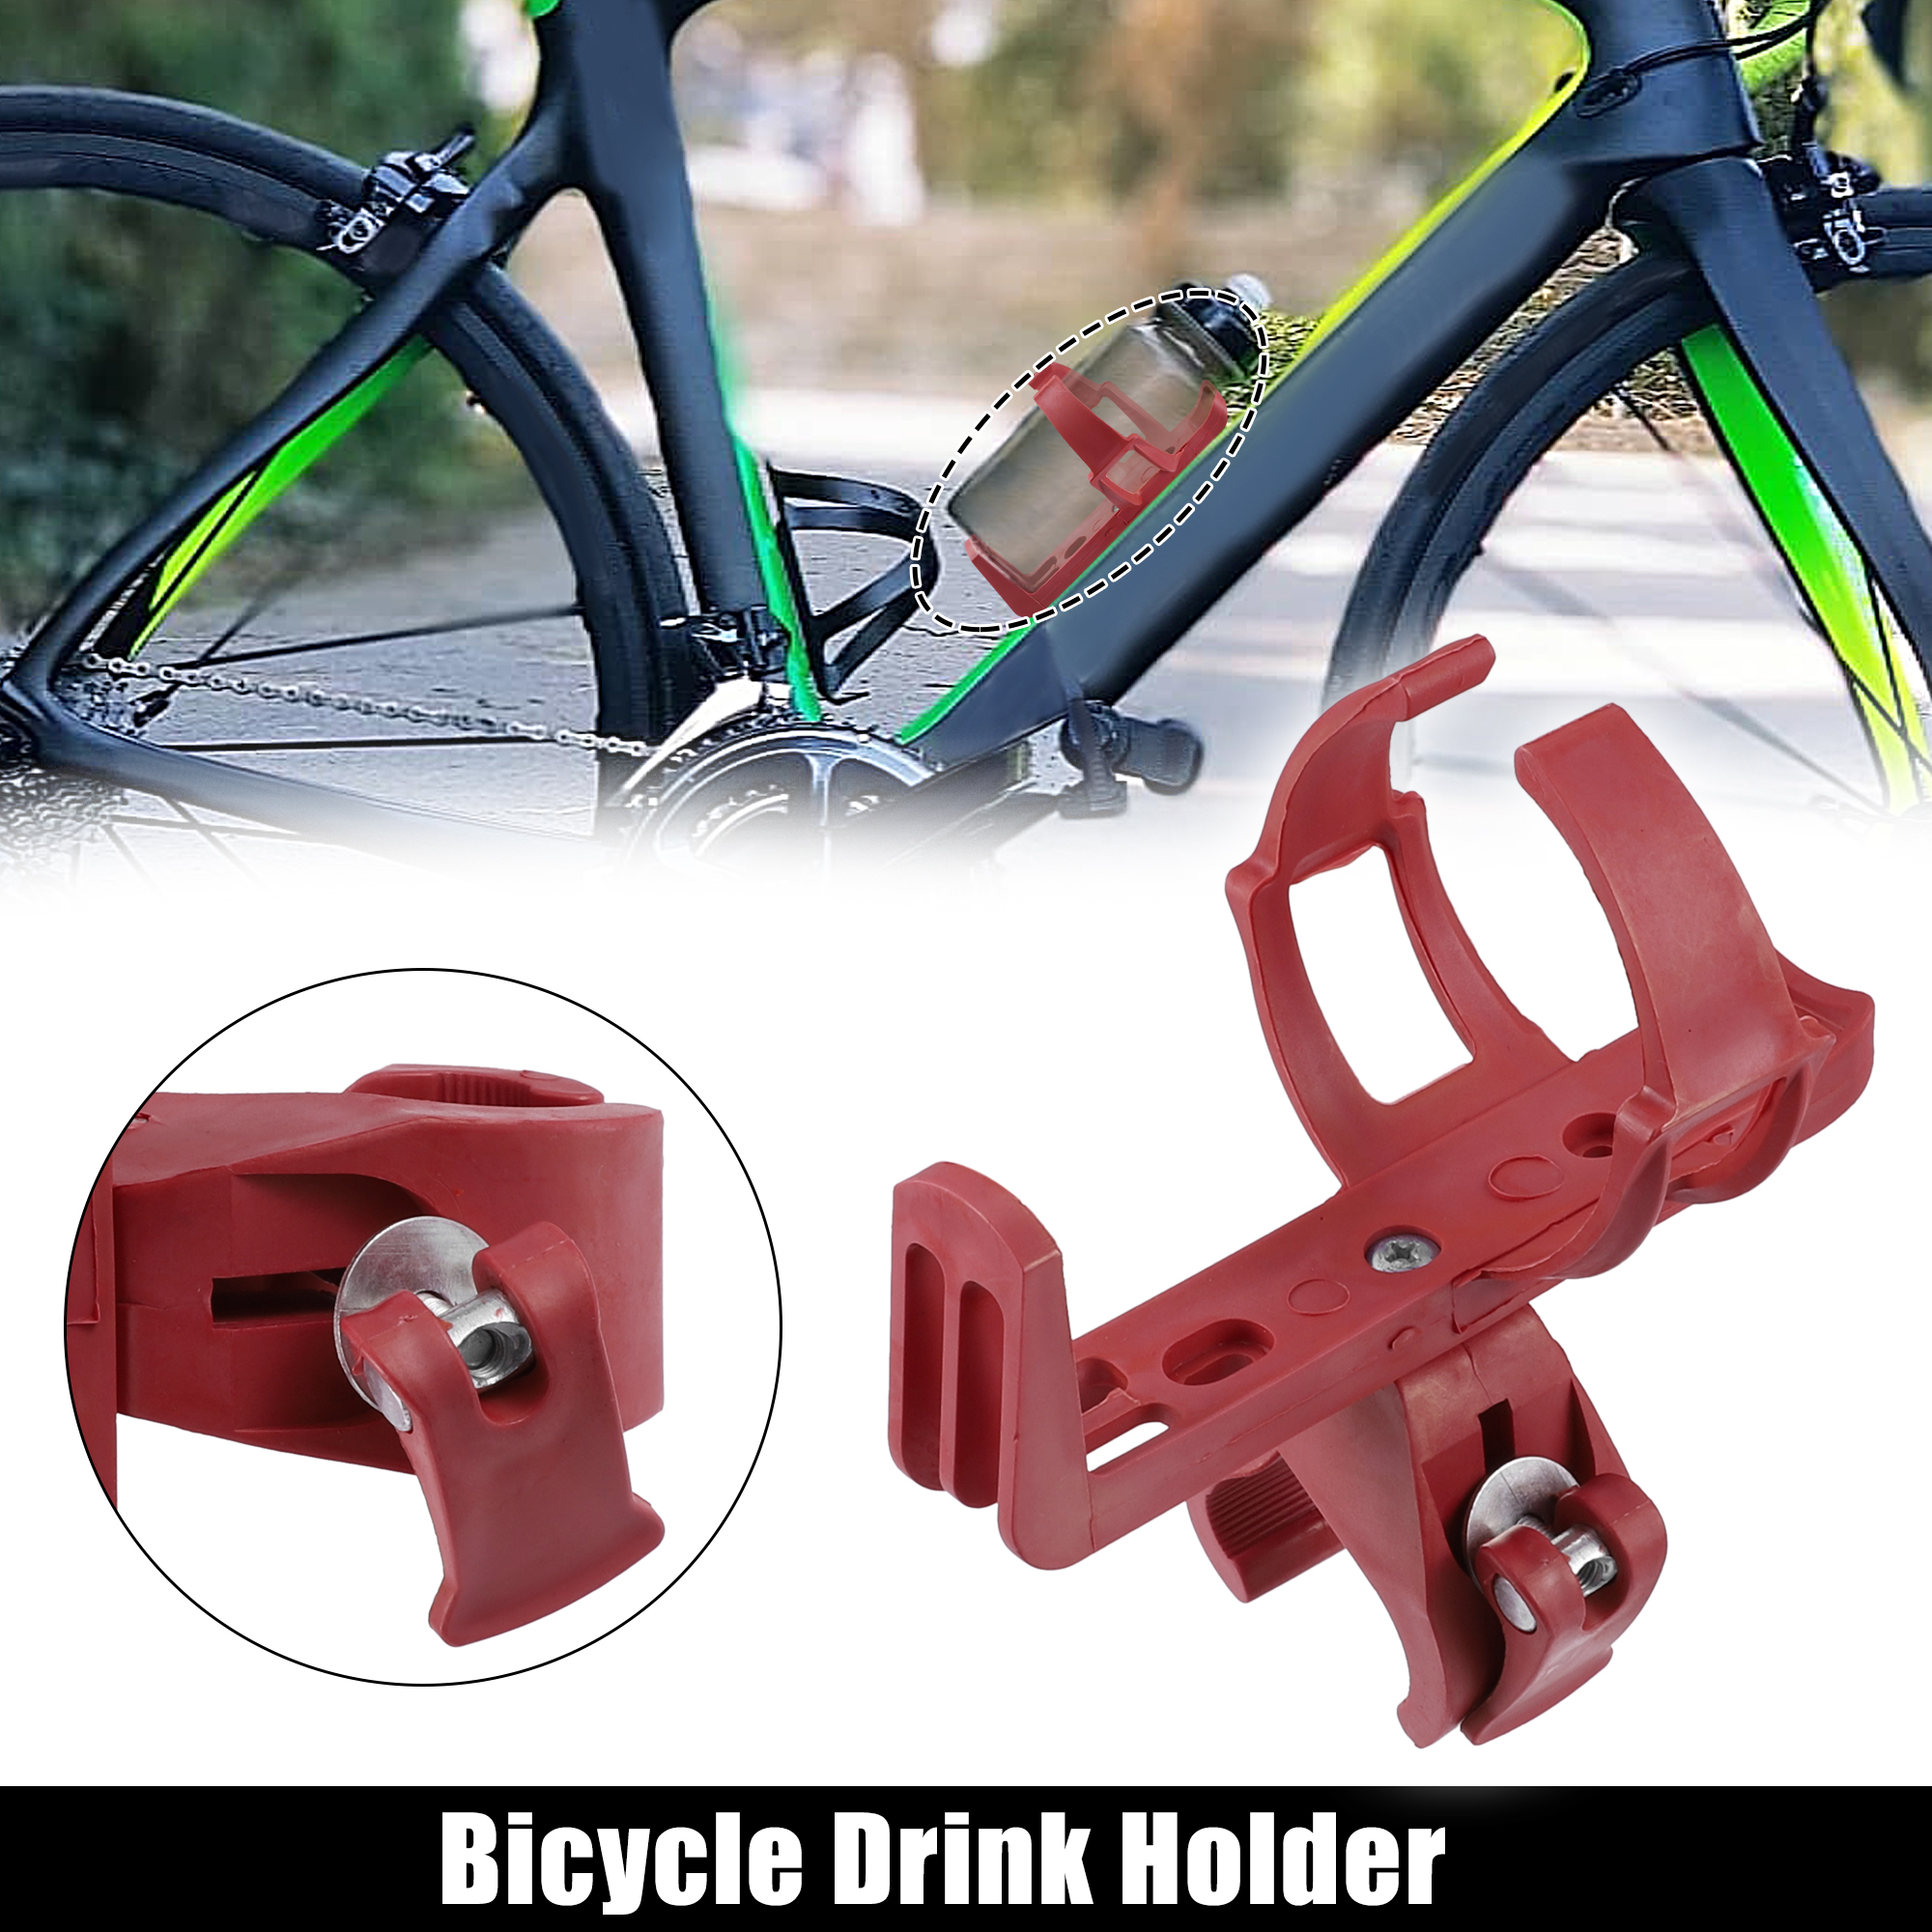 Unique Bargains 1 Pcs Lightweight Bike Water Bottle Cage Holder for Bicycle Plastic Red